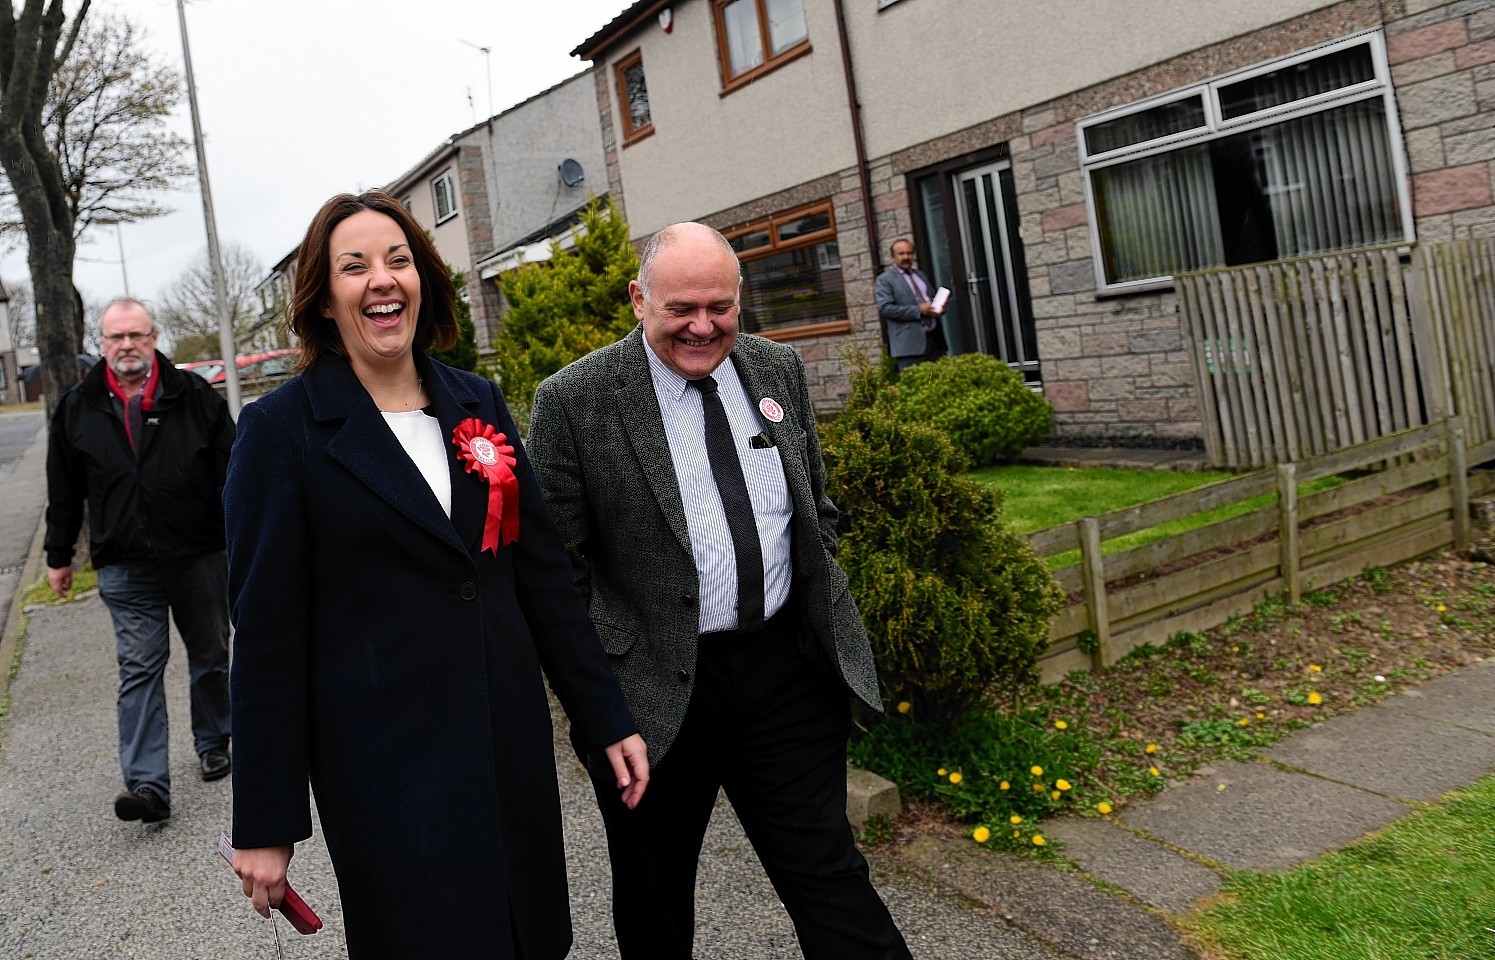 Happier times: Kezia Dugdale and Barney Crockett on the election  trail